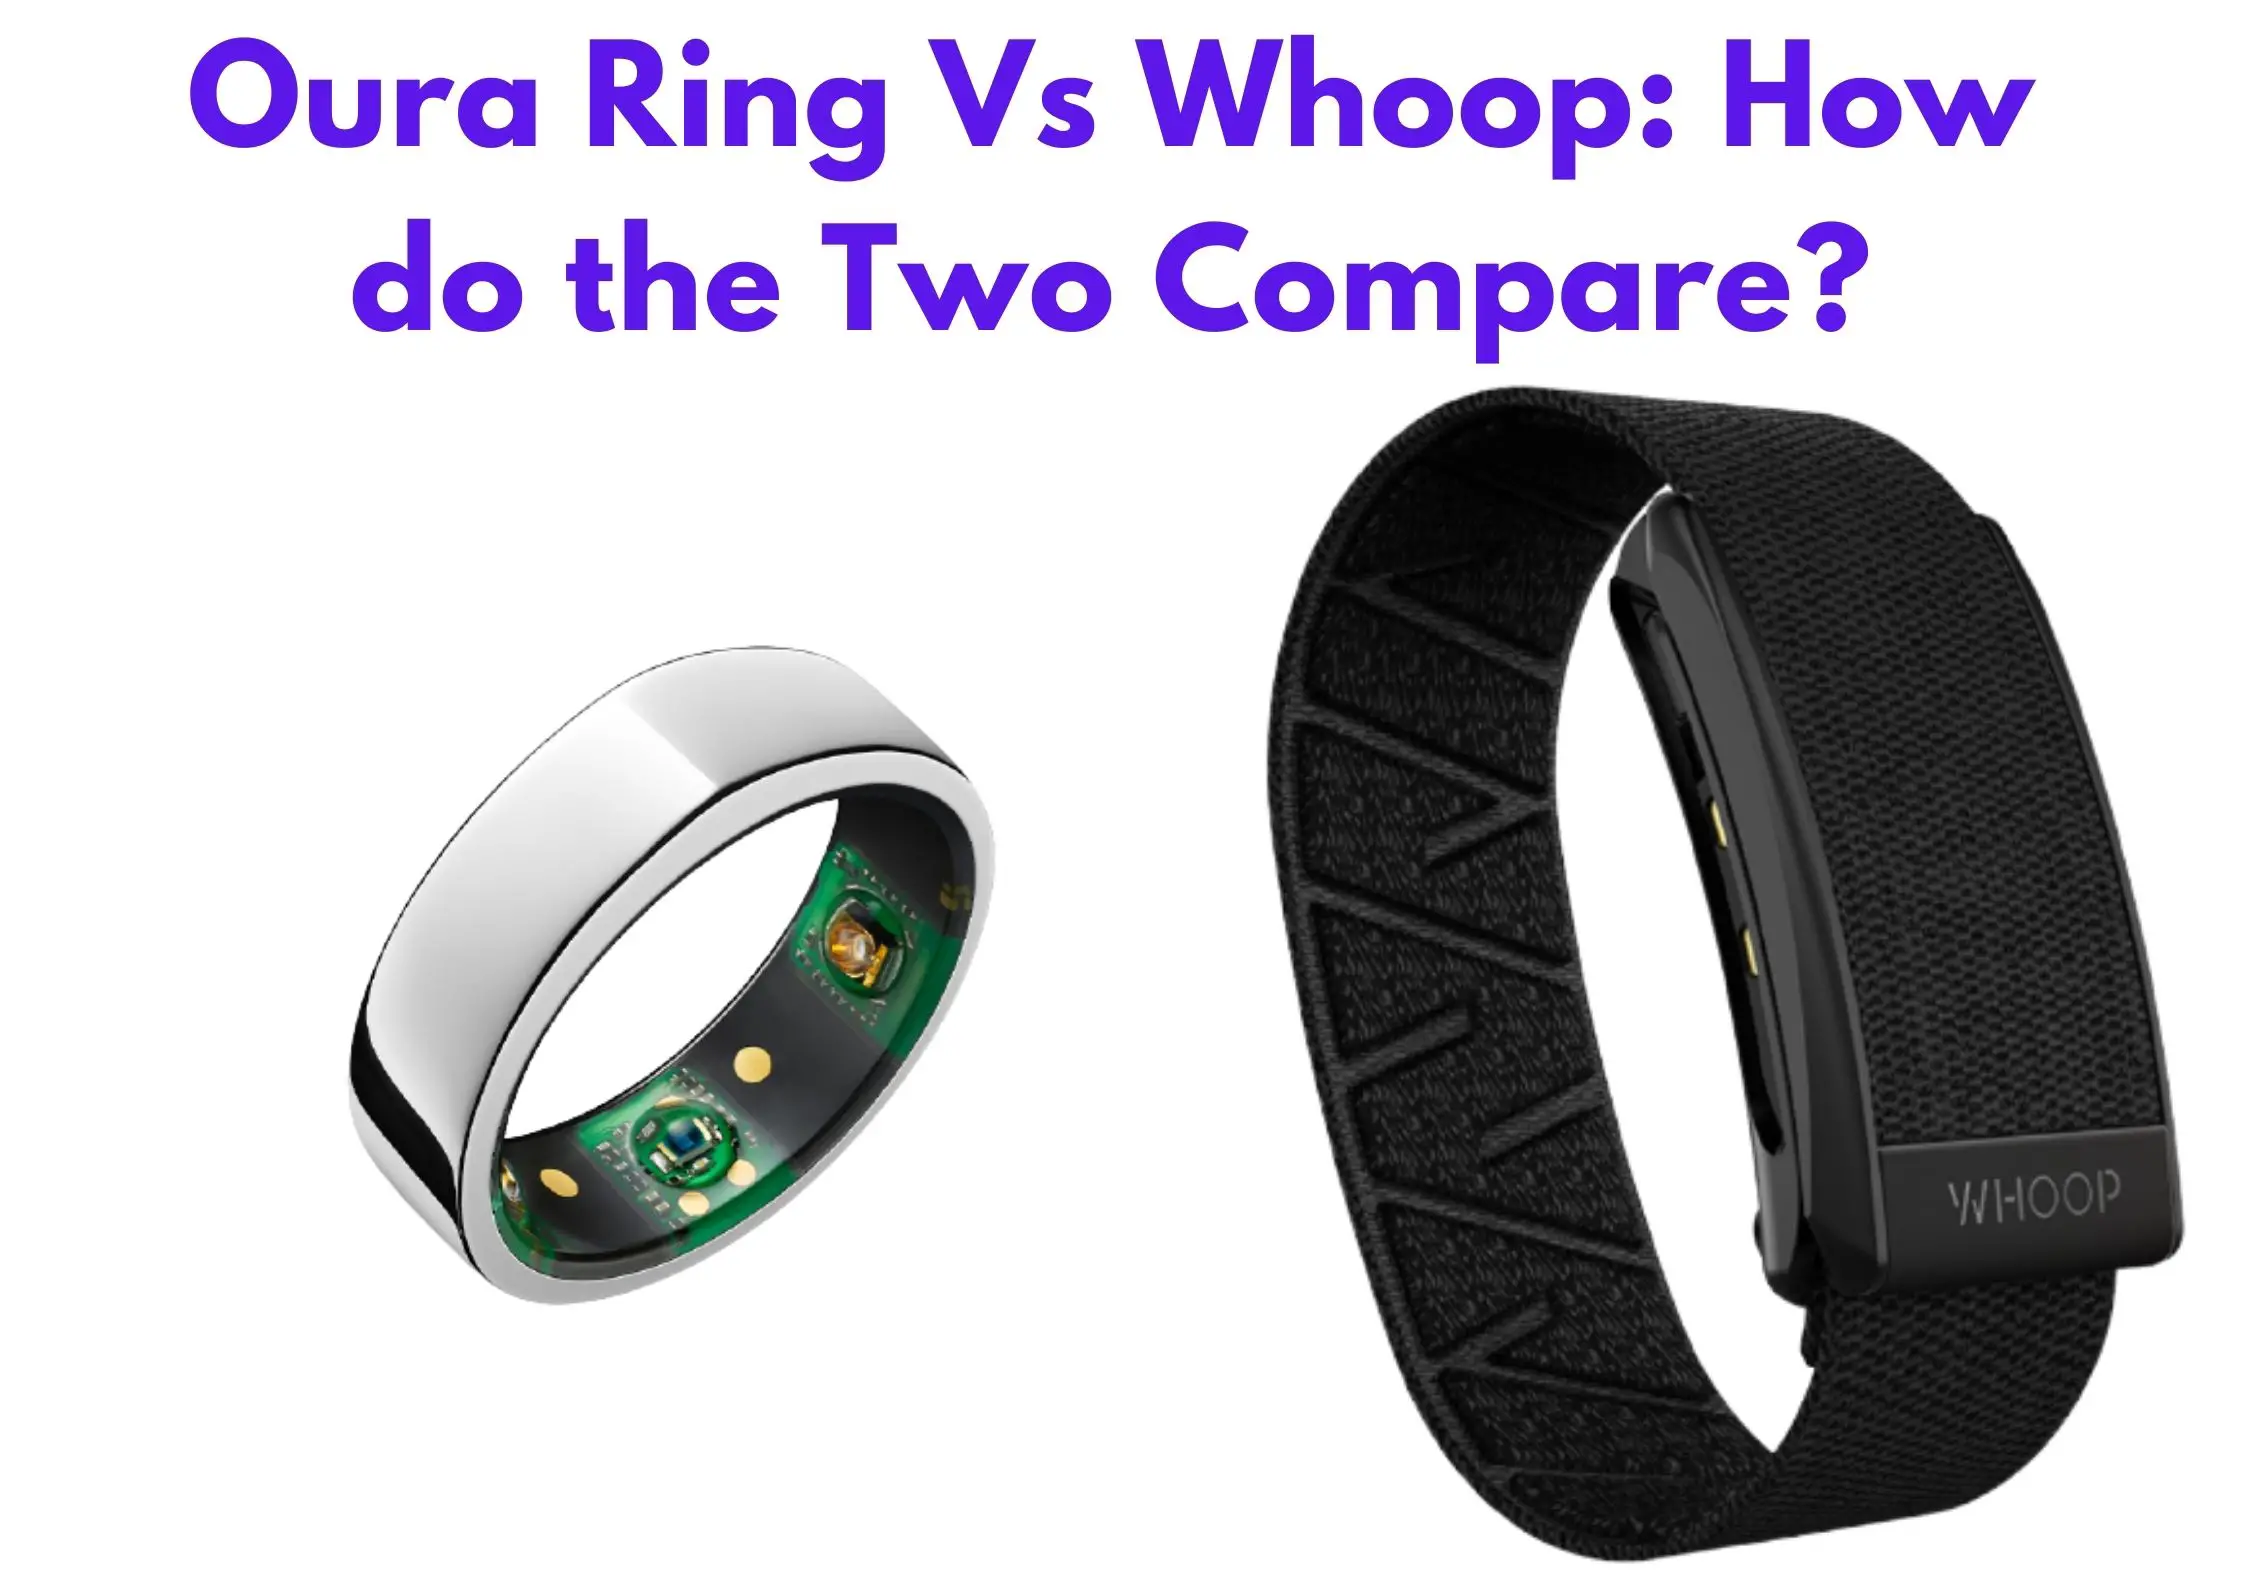 Oura Ring Vs Whoop: How do the Two Compare?